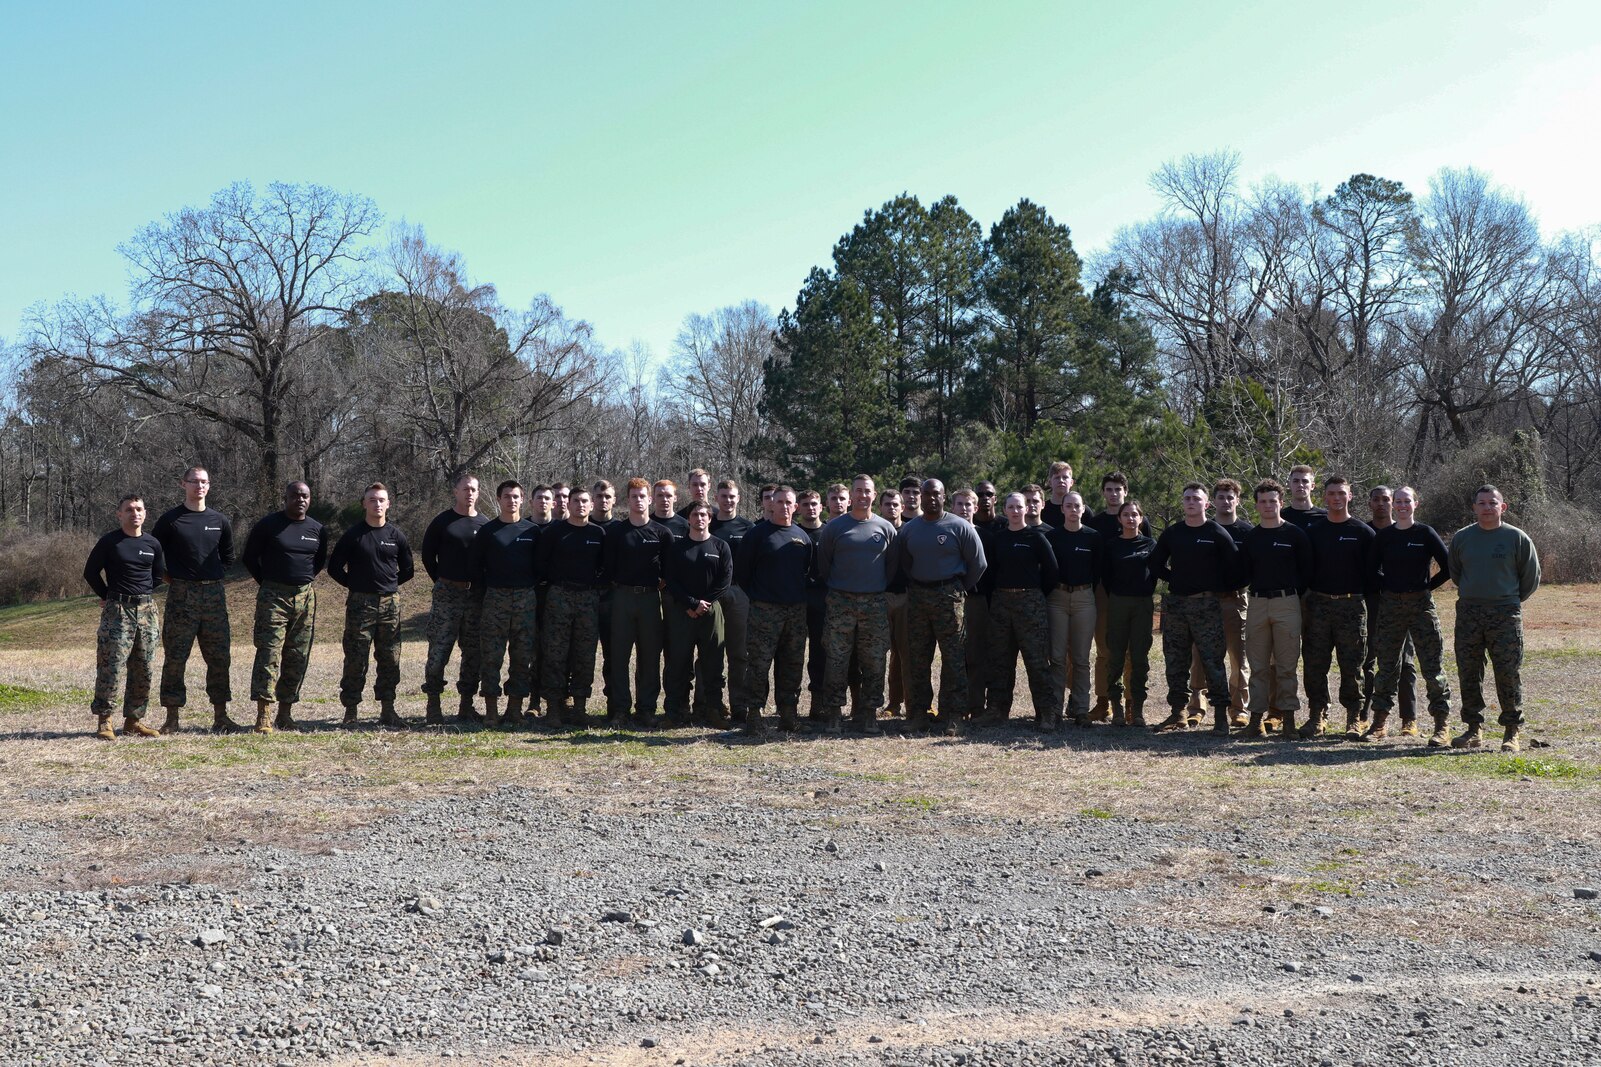 U.S. Marine officer candidates with Officer Selection Office Tuscaloosa stand for a photo with the leadership of 6th Marine Corps District after a pool function at Sokol Park in Tuscaloosa Alabama, February 12, 2022. The candidates conducted this pool function in order to help prepare them both physically and mentally to become U.S. Marine Corps officers.